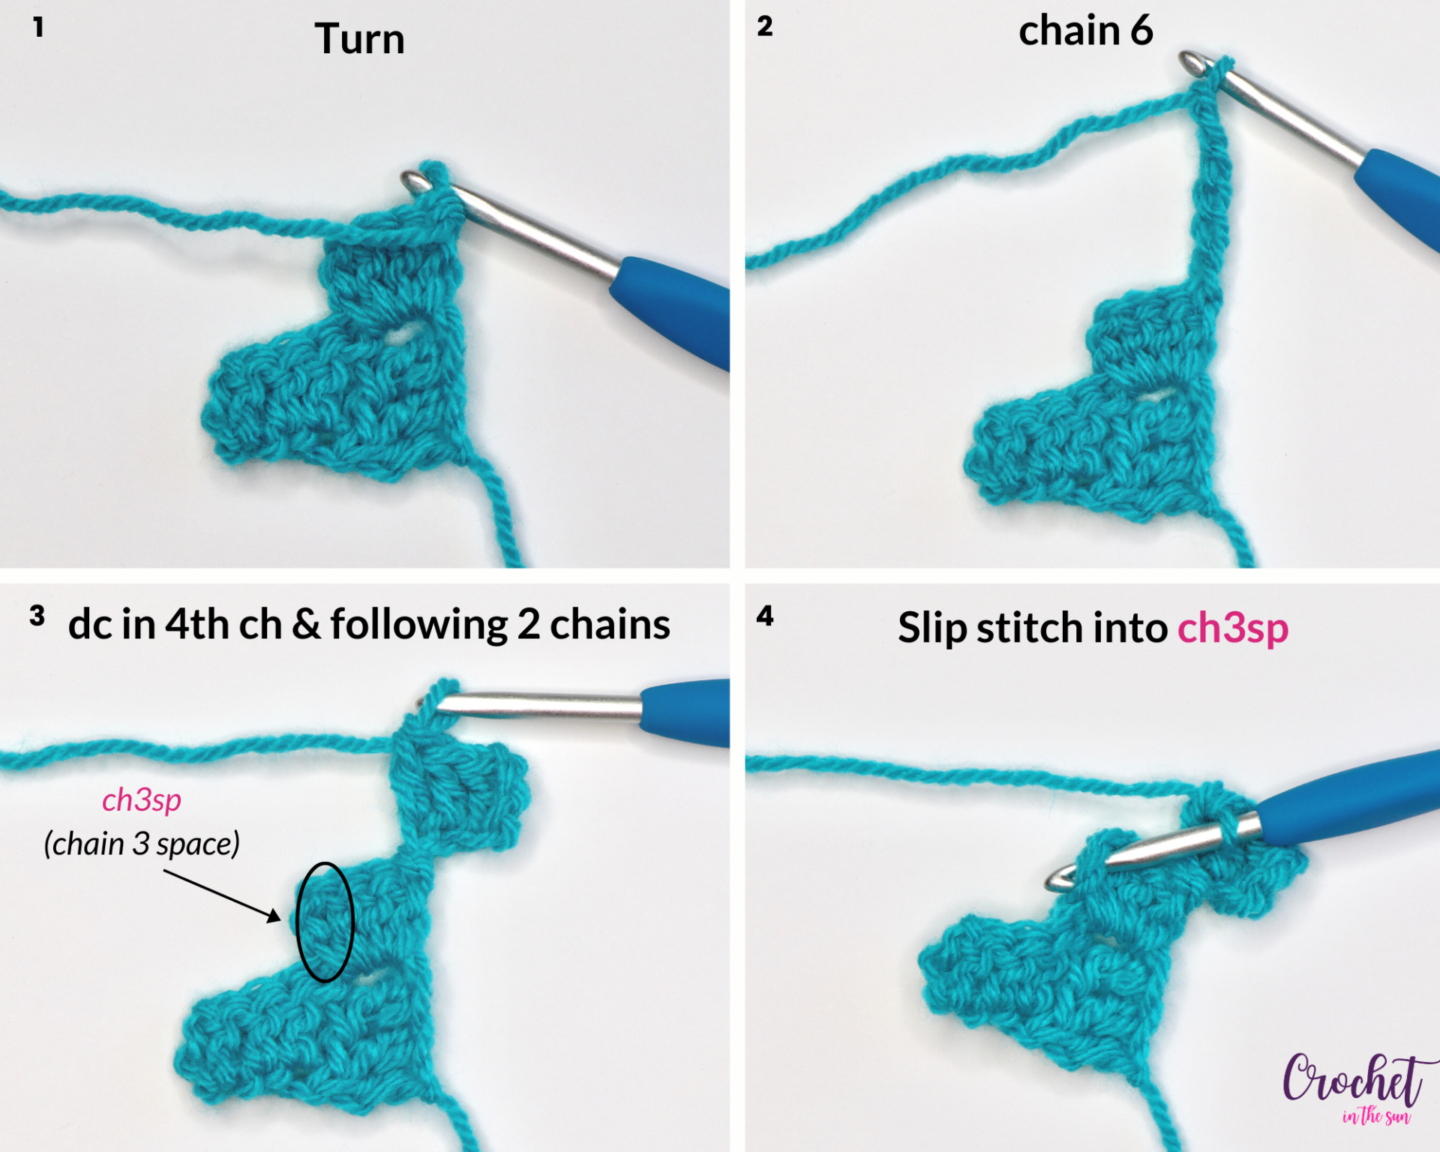 Learn how to corner to corner crochet (photo 4 of 5). This provides a clear, step-by-step photo tutorial for the c2c stitch (corner to corner stitch). This stitch is easy to learn and is beginner friendly. Learn how to crochet! There are so many c2c project ideas you will be able to complete!